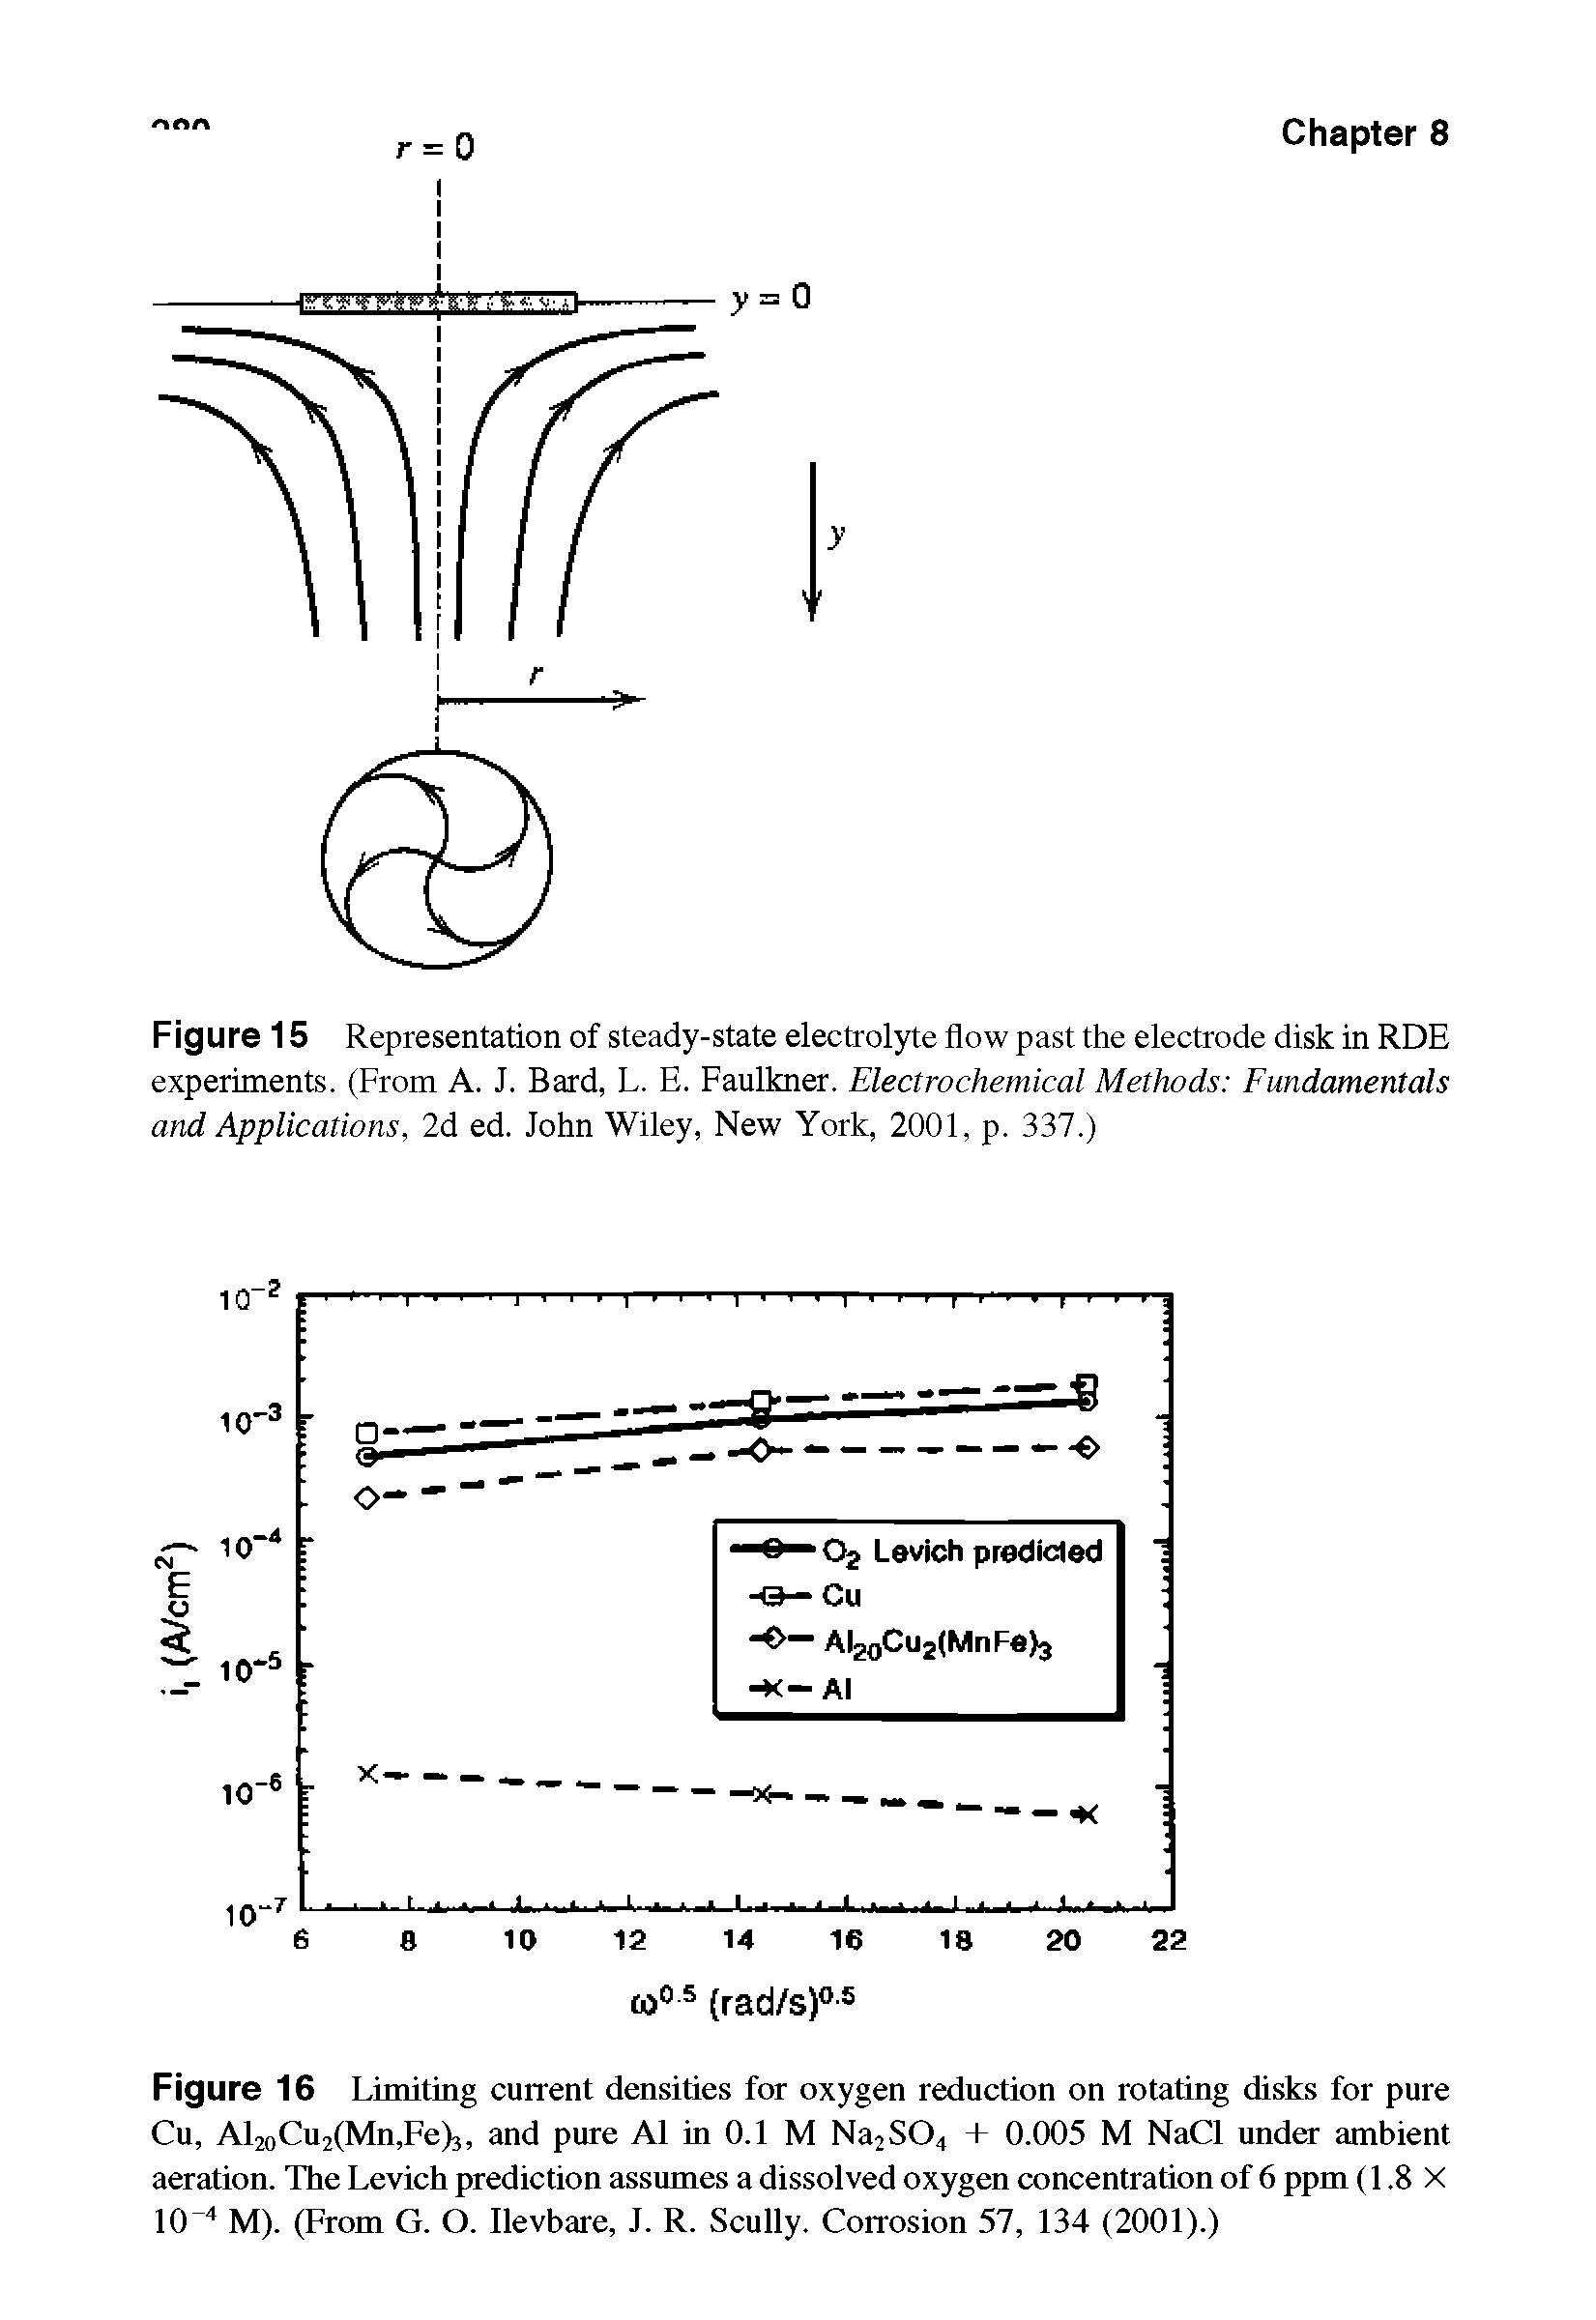 Figure 15 Representation of steady-state electrolyte flow past the electrode disk in RDE experiments. (From A. J. Bard, L. E. Faulkner. Electrochemical Methods Fundamentals and Applications, 2d ed. John Wiley, New York, 2001, p. 337.)...